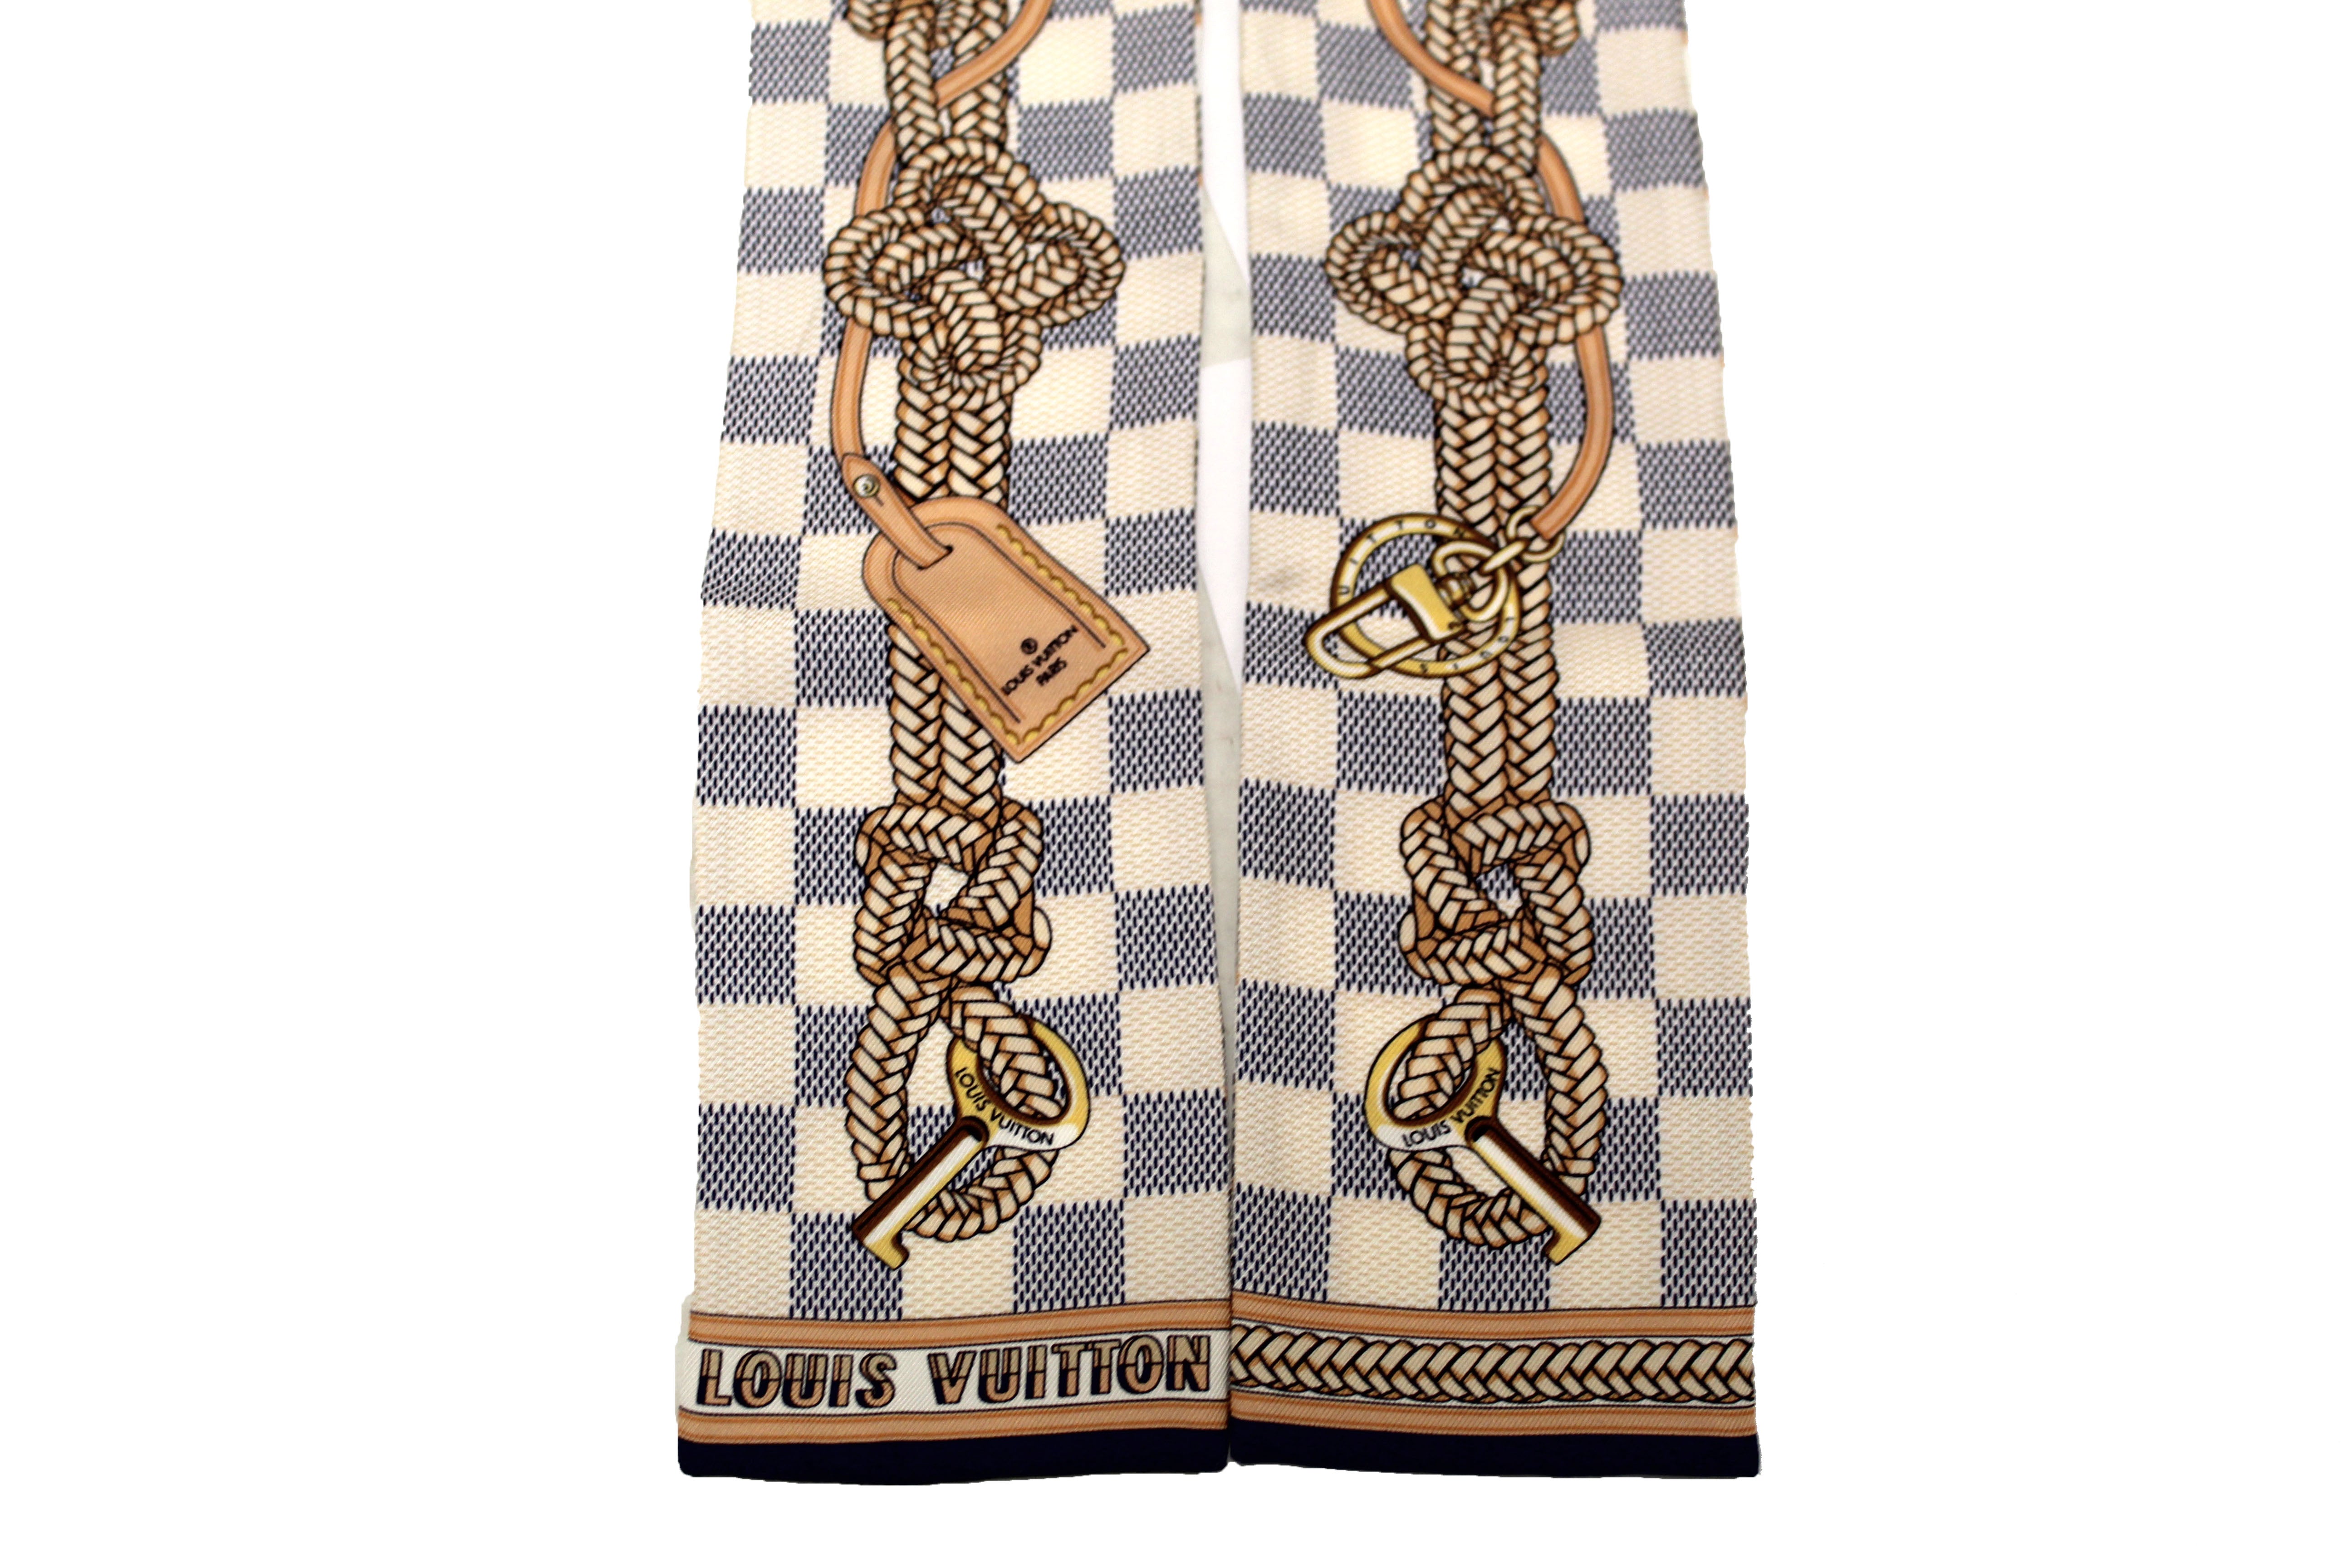 HOW I TIE TWILLY/BANDEAU ON MY LOUIS VUITTON BAGS